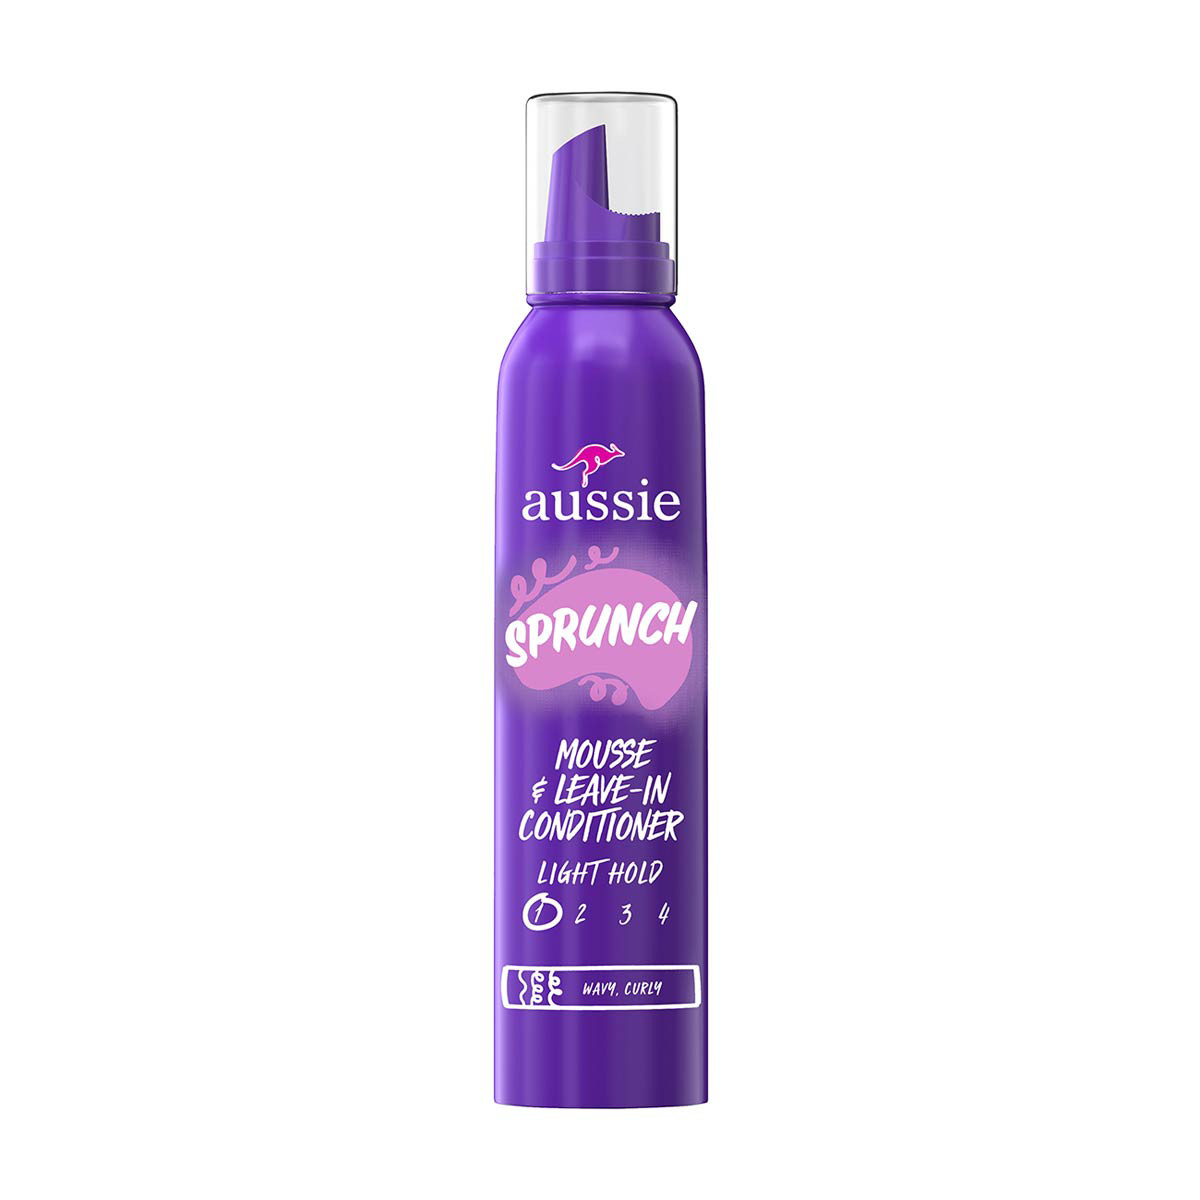 Aussie Sprunch Mousse & Leave-In Conditioner for Curly & Wavy Hair, 6 oz